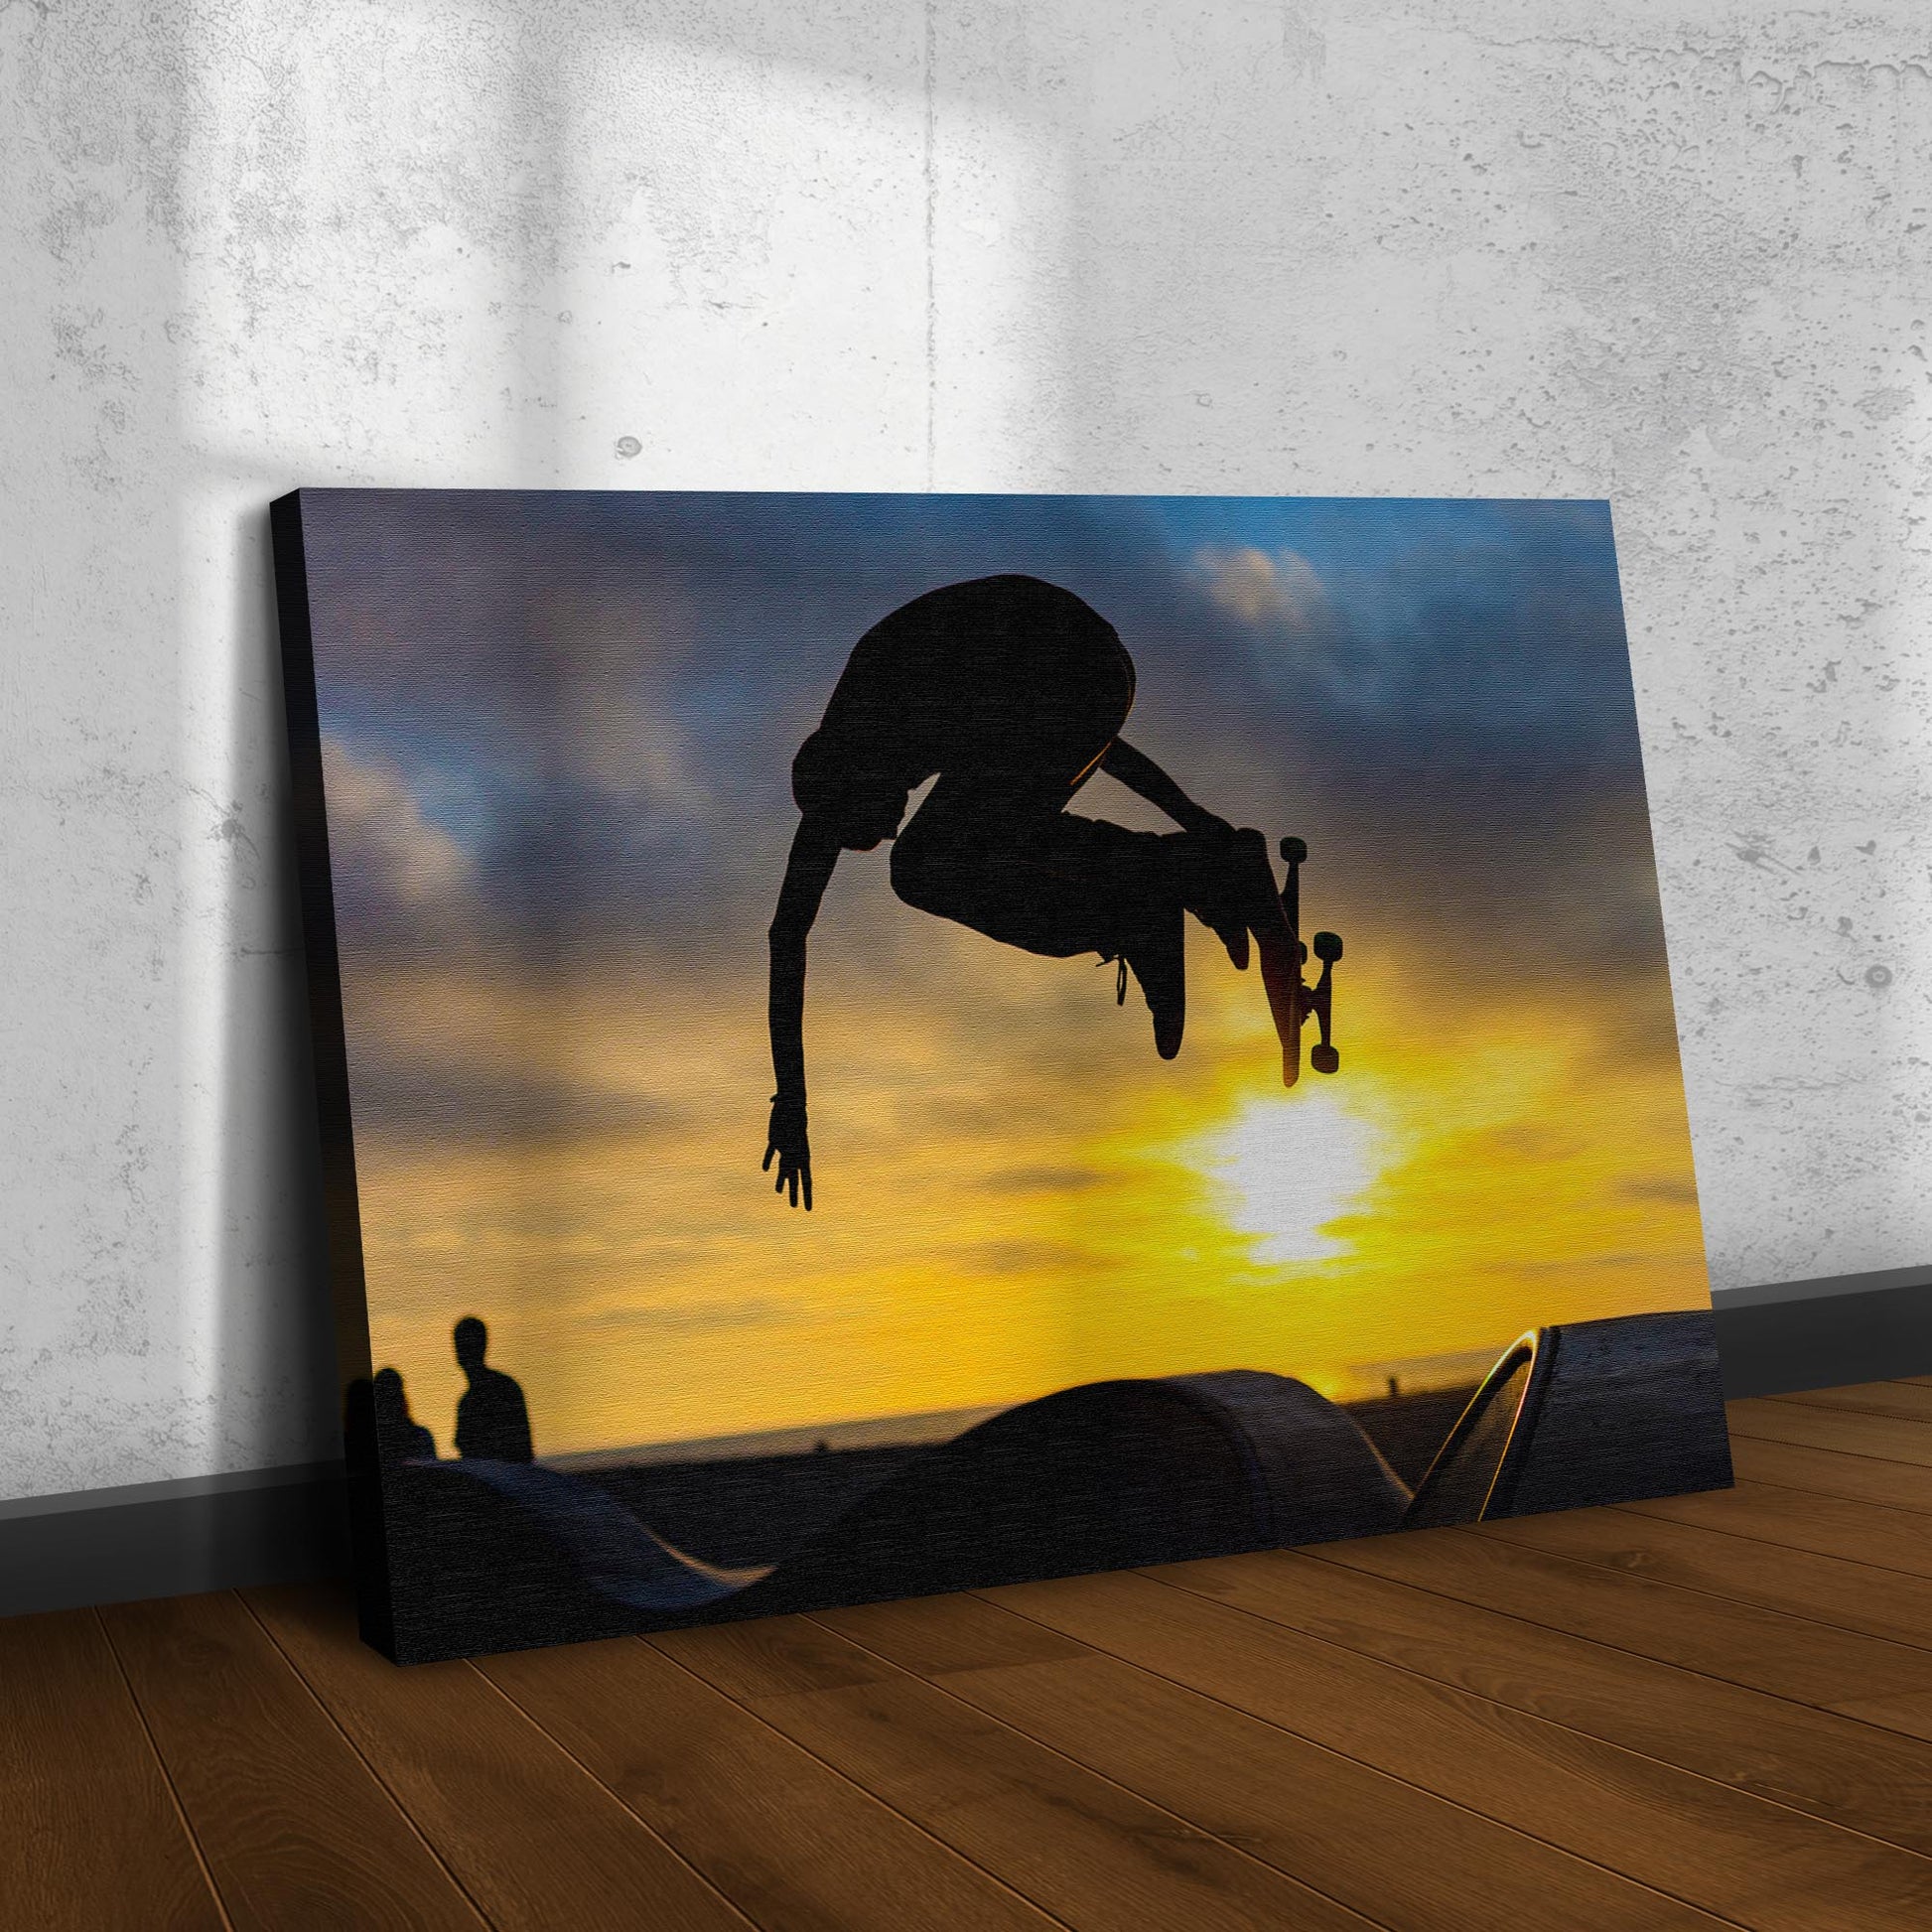 Skateboard Ramp Canvas Wall Art Style 2 - Image by Tailored Canvases